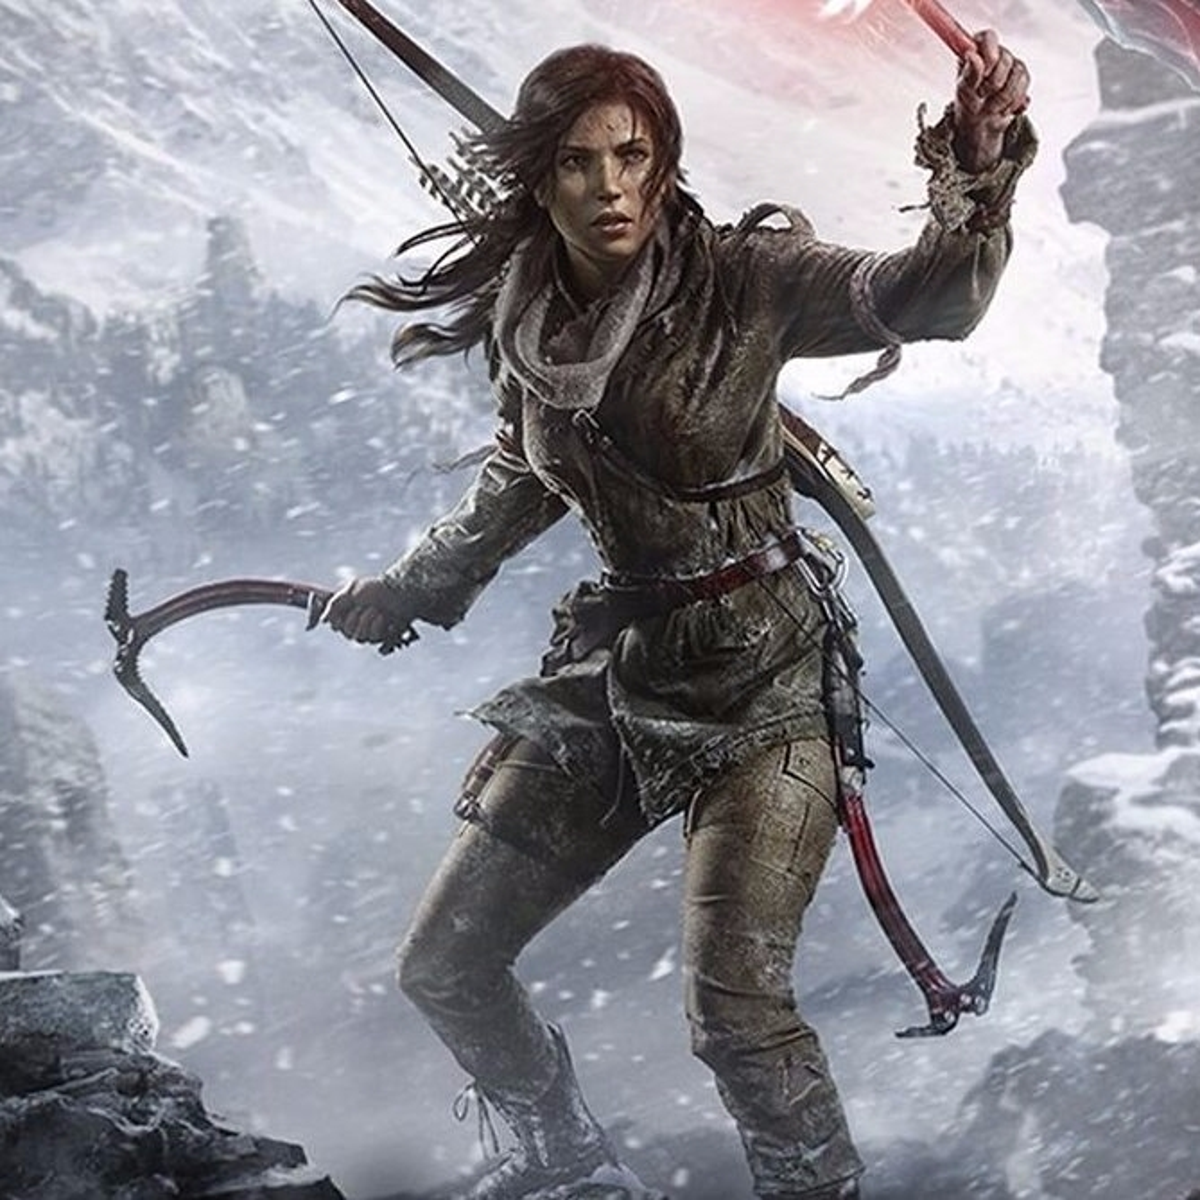 Rise of the Tomb Raider Extended Edition (PC / Mac / Linux) - Steam - Digital Code